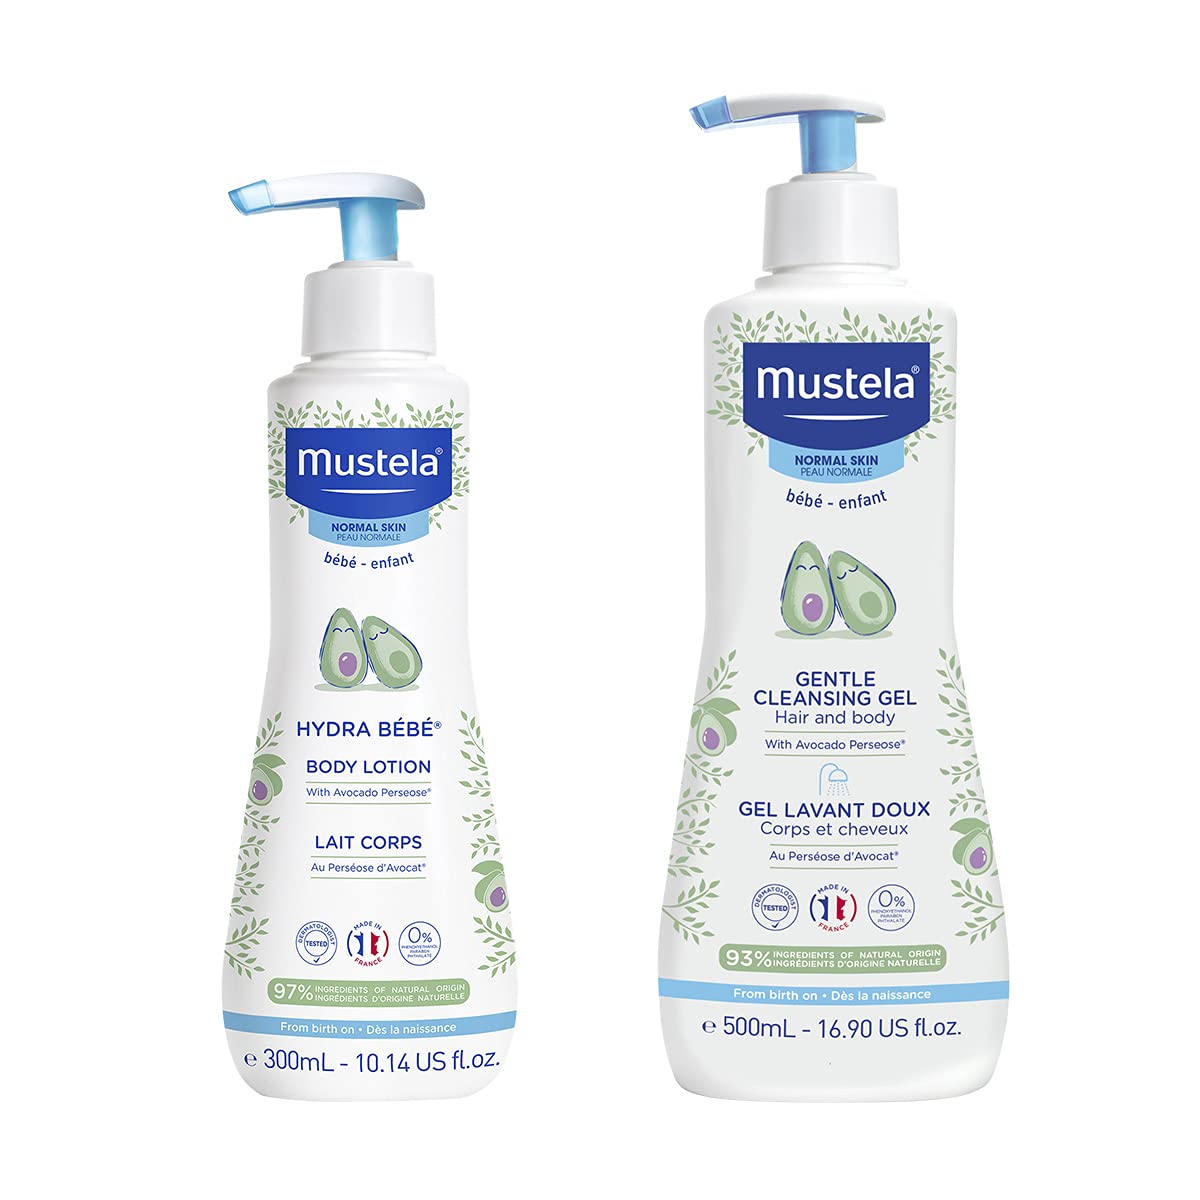 Mustela Baby Bath Time Gift Set – Baby Skin Care Essentials with Natural Ingredients – For Very Sensitive, Eczema-Prone, Normal or Dry Skin